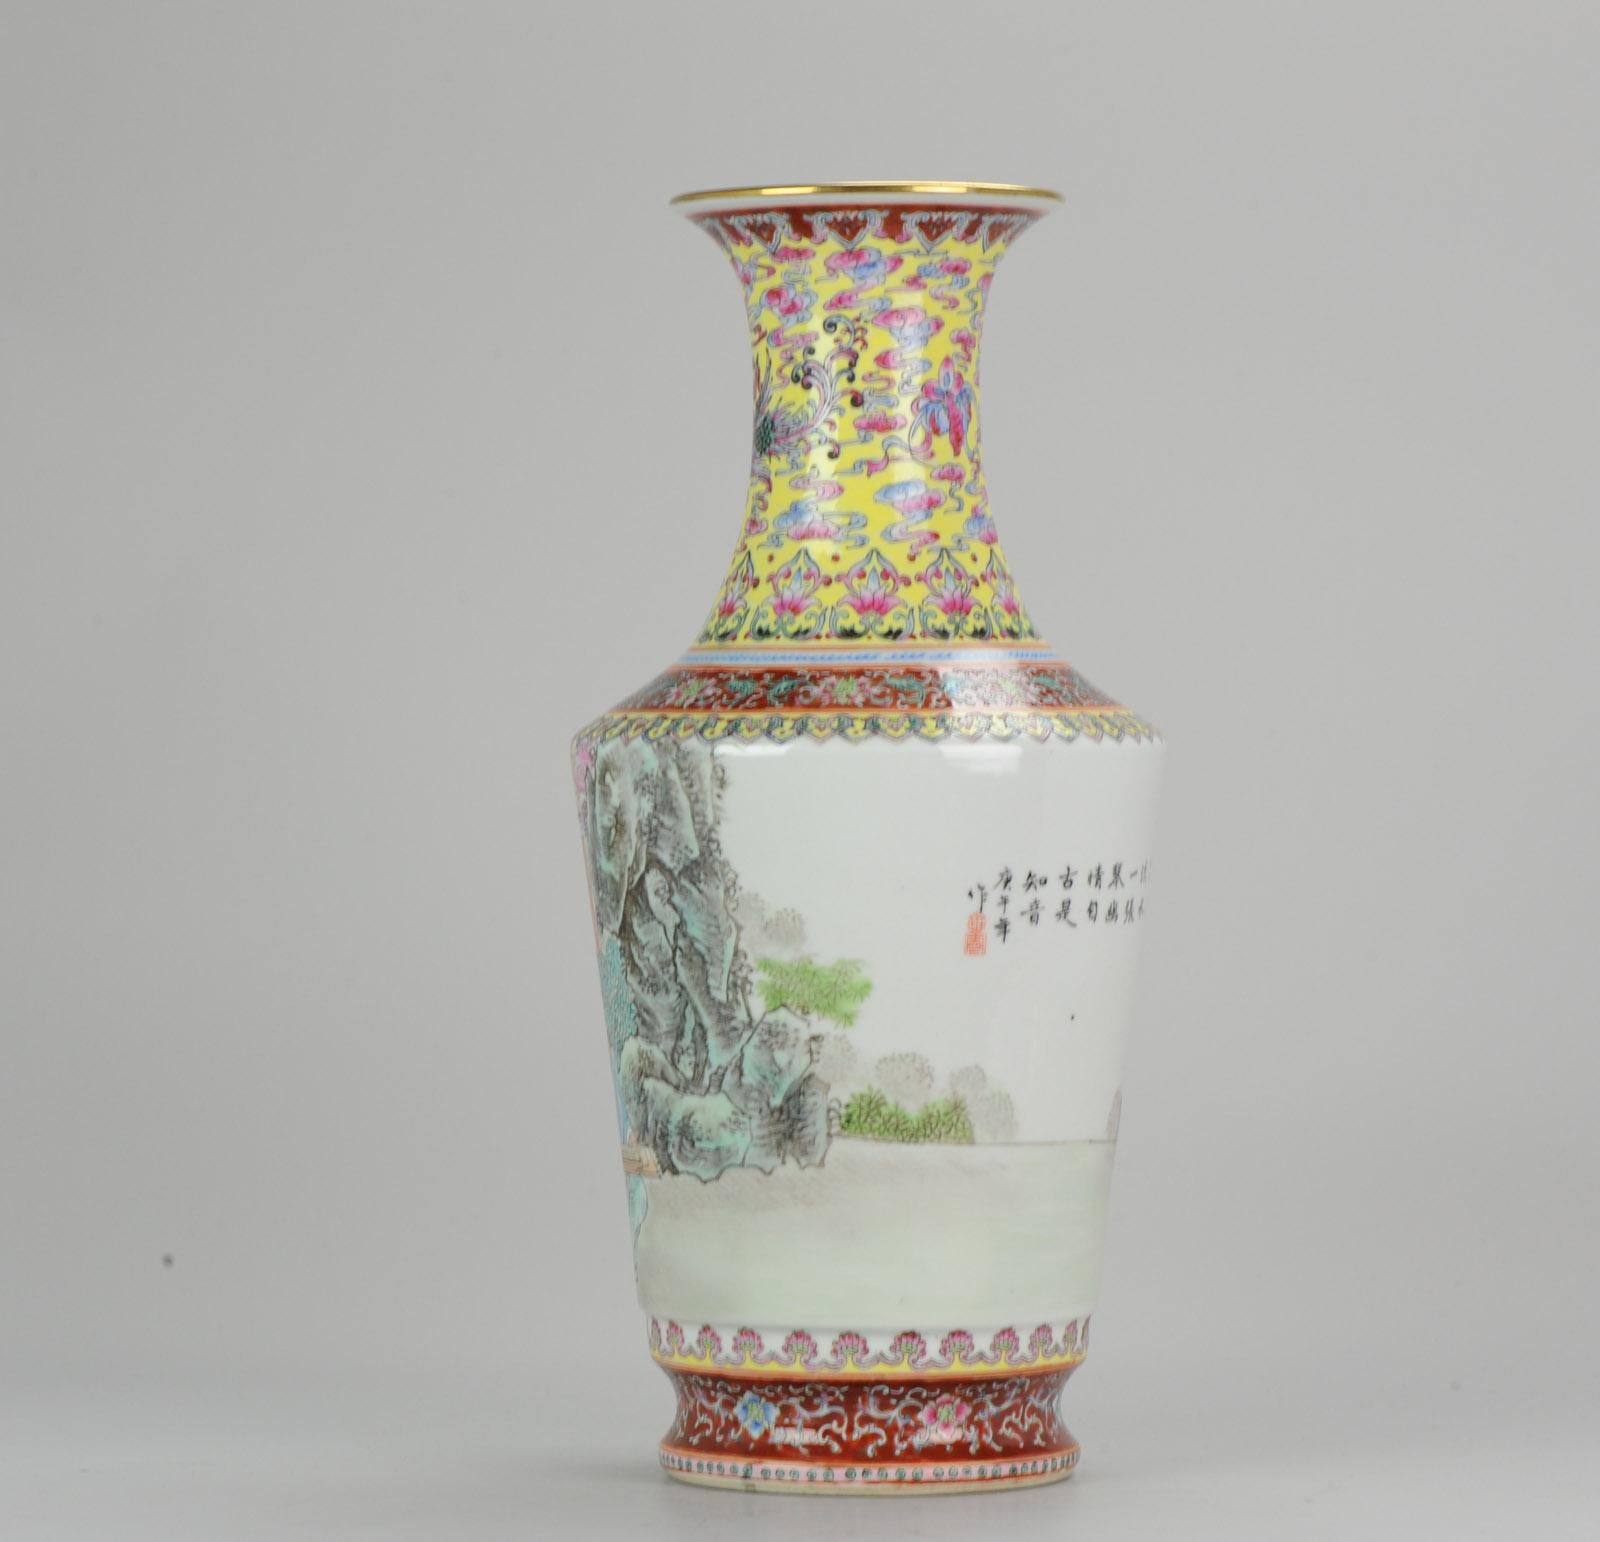 A very nicely decorated vase, made in 1989, really nice decoration. Marked at base.

Additional information:
Material: Porcelain & Pottery
Region of Origin: China
Country of Manufacturing: China
Period: 20th century
Condition: Overall Condition;